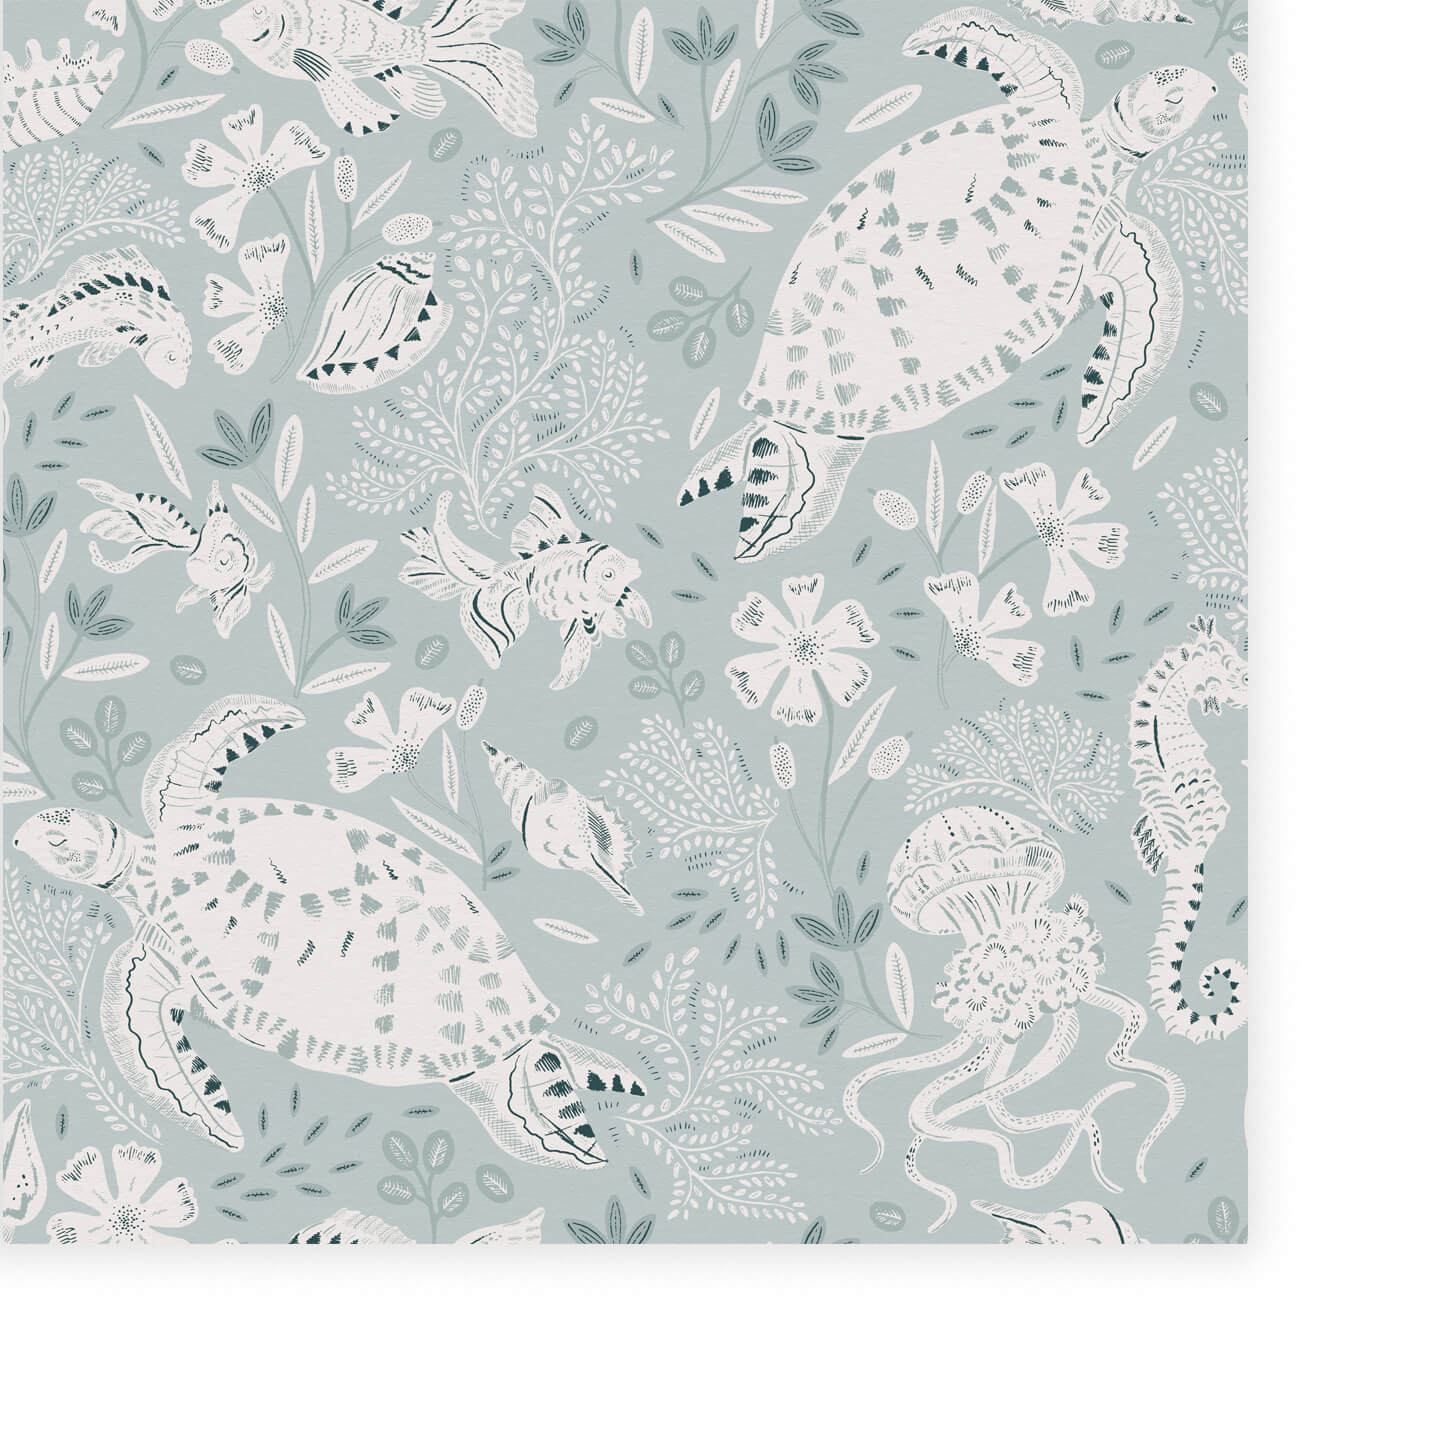 Ocean inspired wallpaper  of a white swimming turtle, shells and fish with leaves and flowers. Blue background.